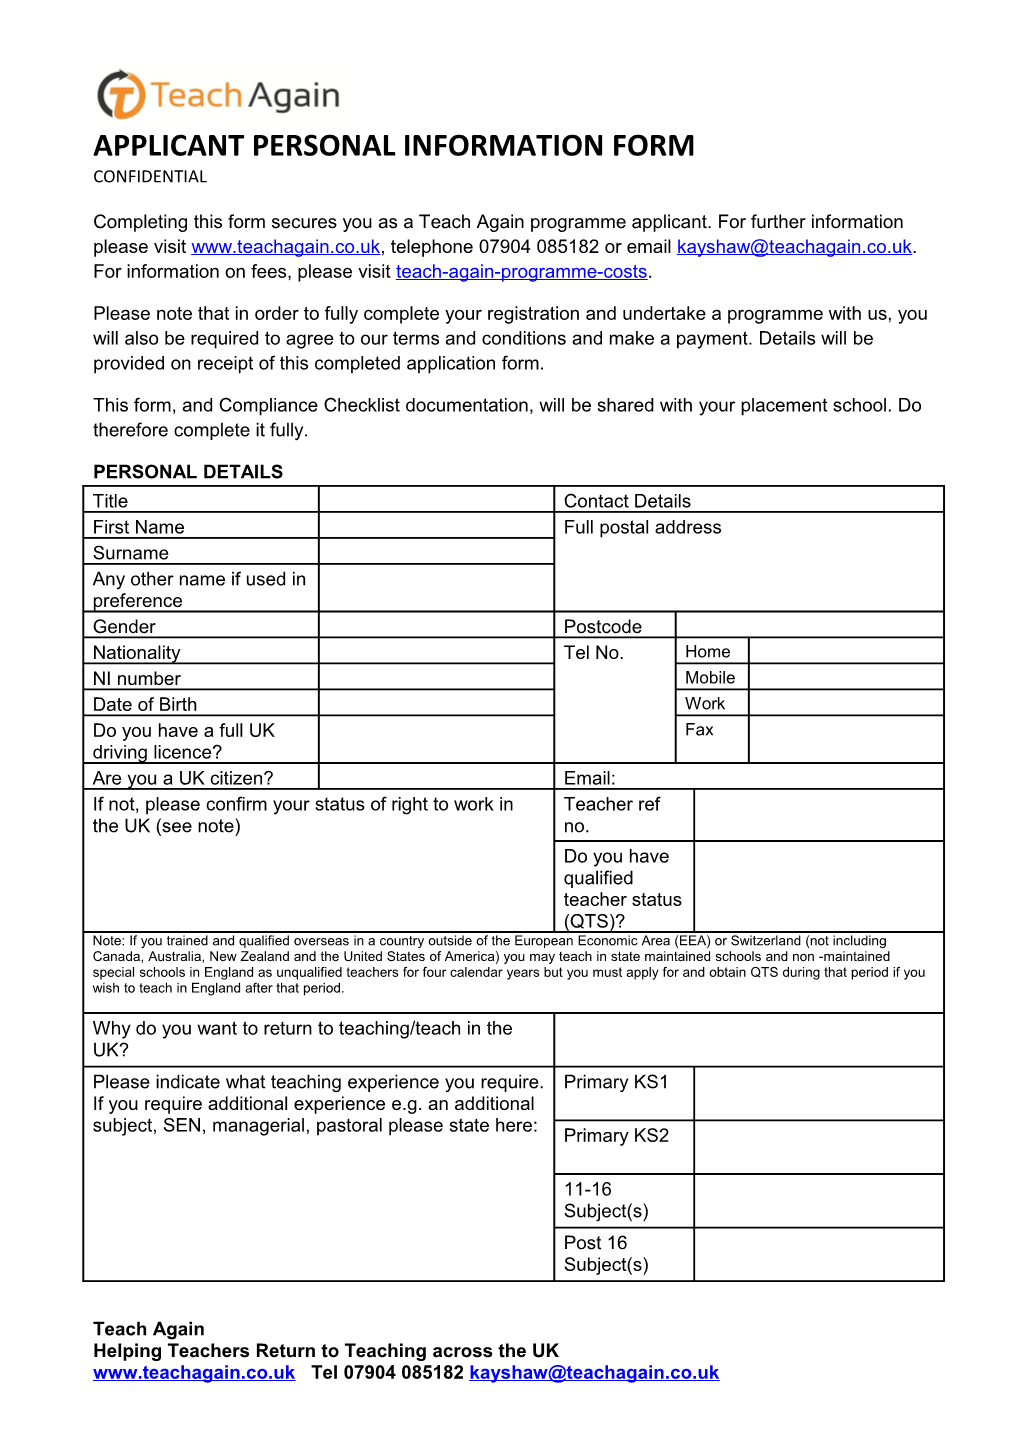 Completing This Form Secures You As a Teach Again Programme Applicant